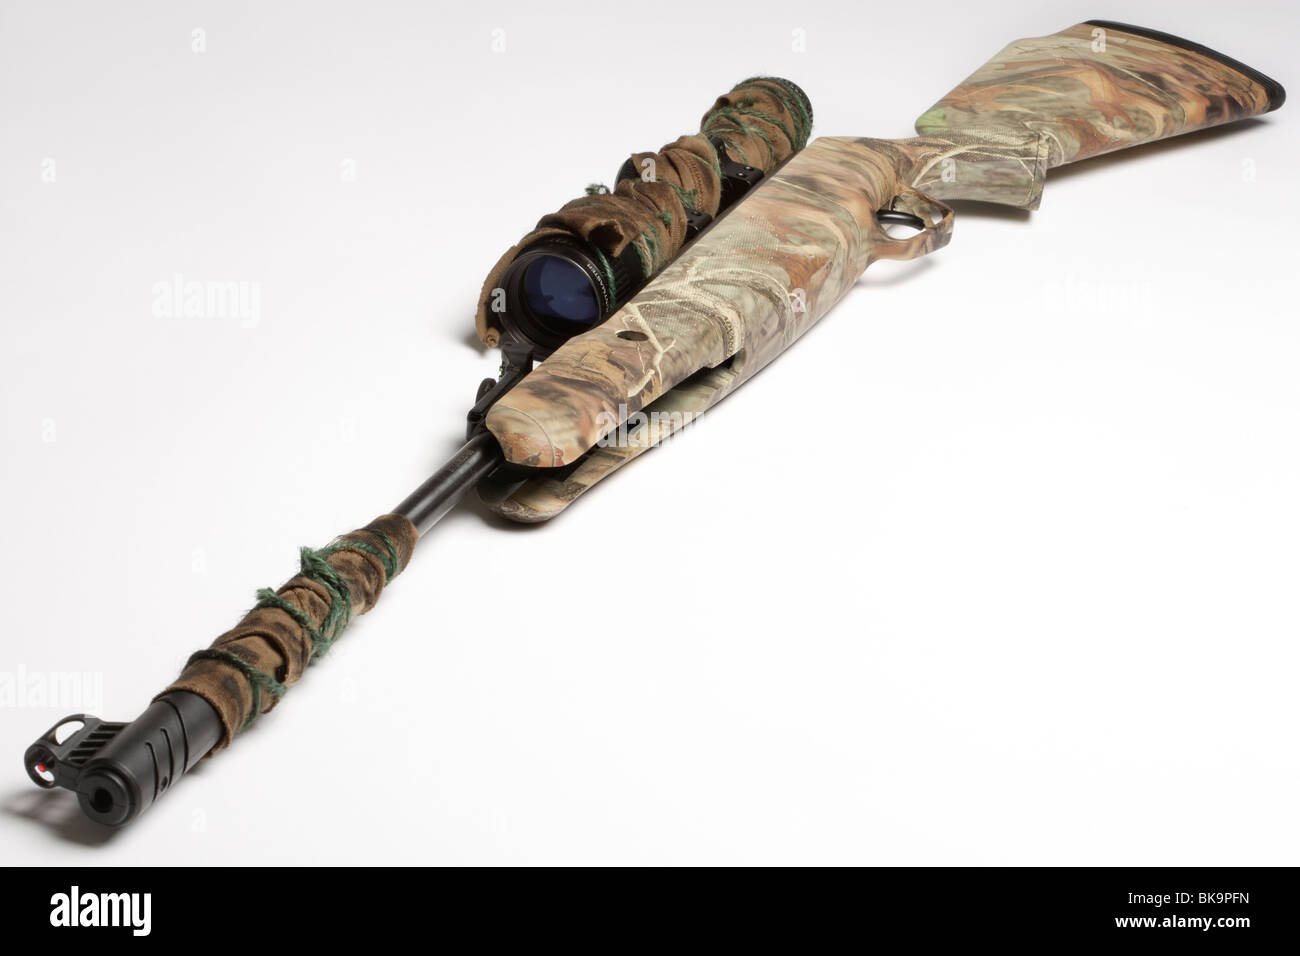 Camouflage air rifle gun with telescopic sights and a stand Stock Photo